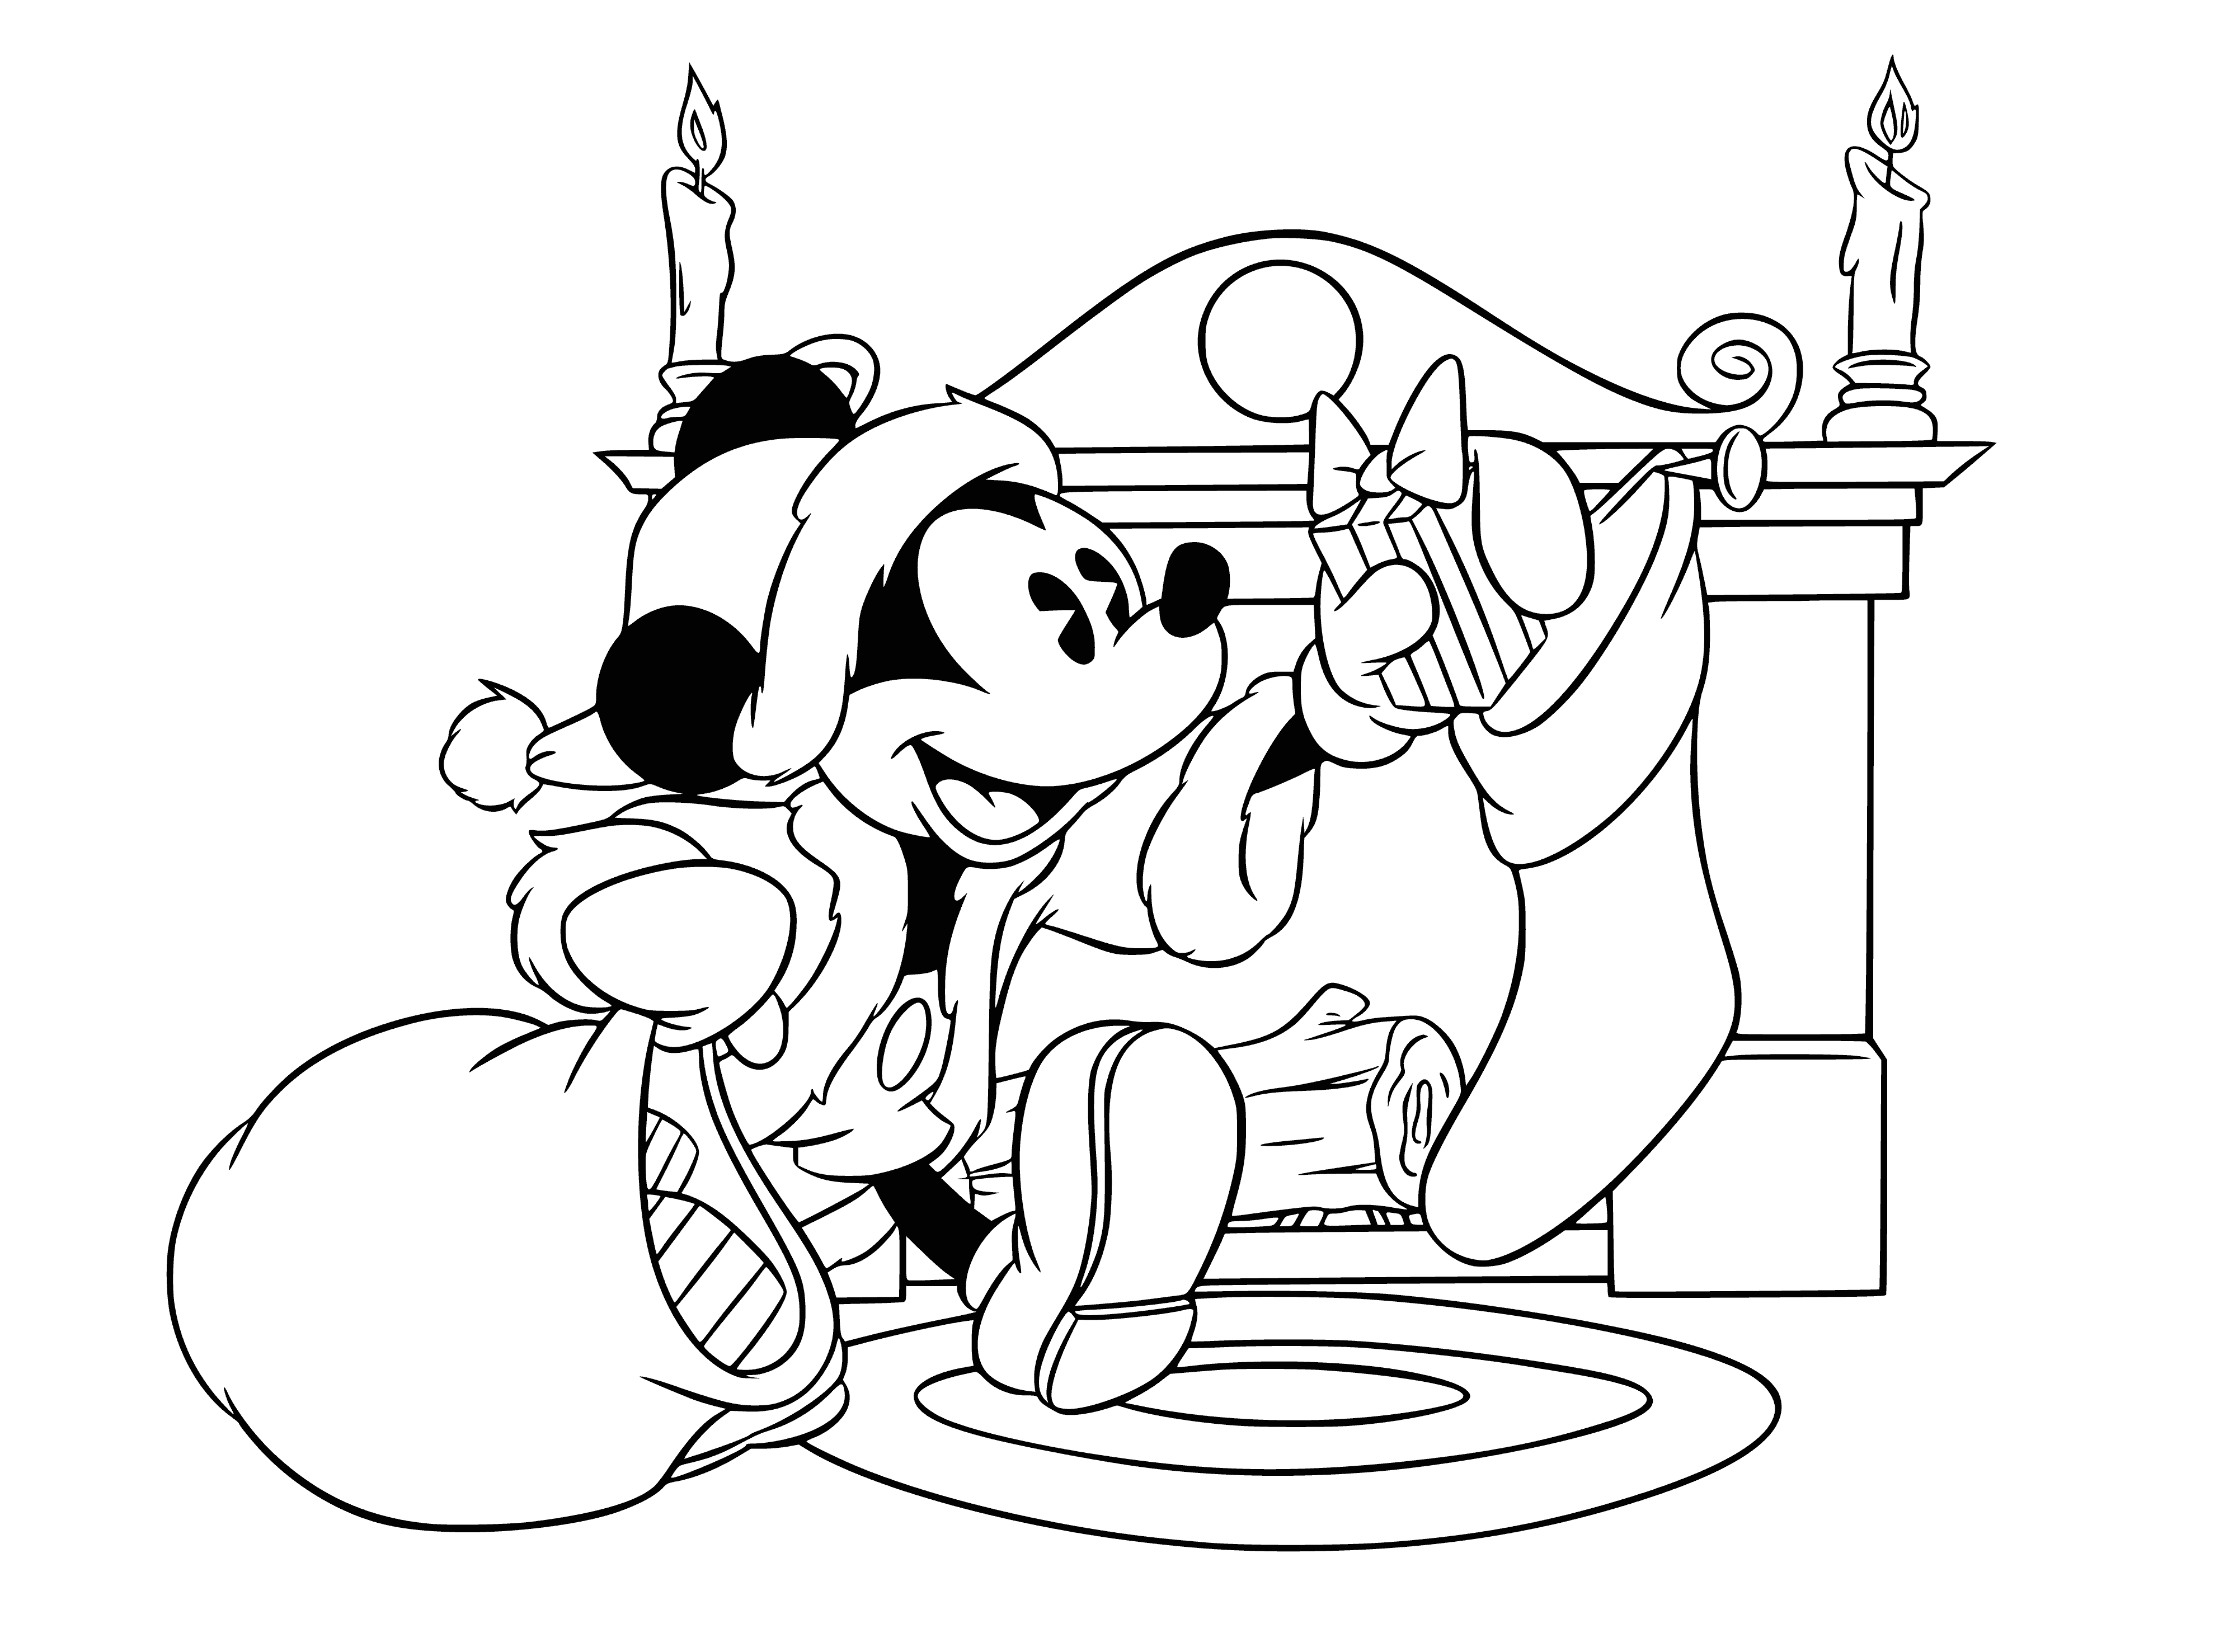 coloring page: Mickey stands in front of Christmas tree with friends, presents in arms, all having a merry time.